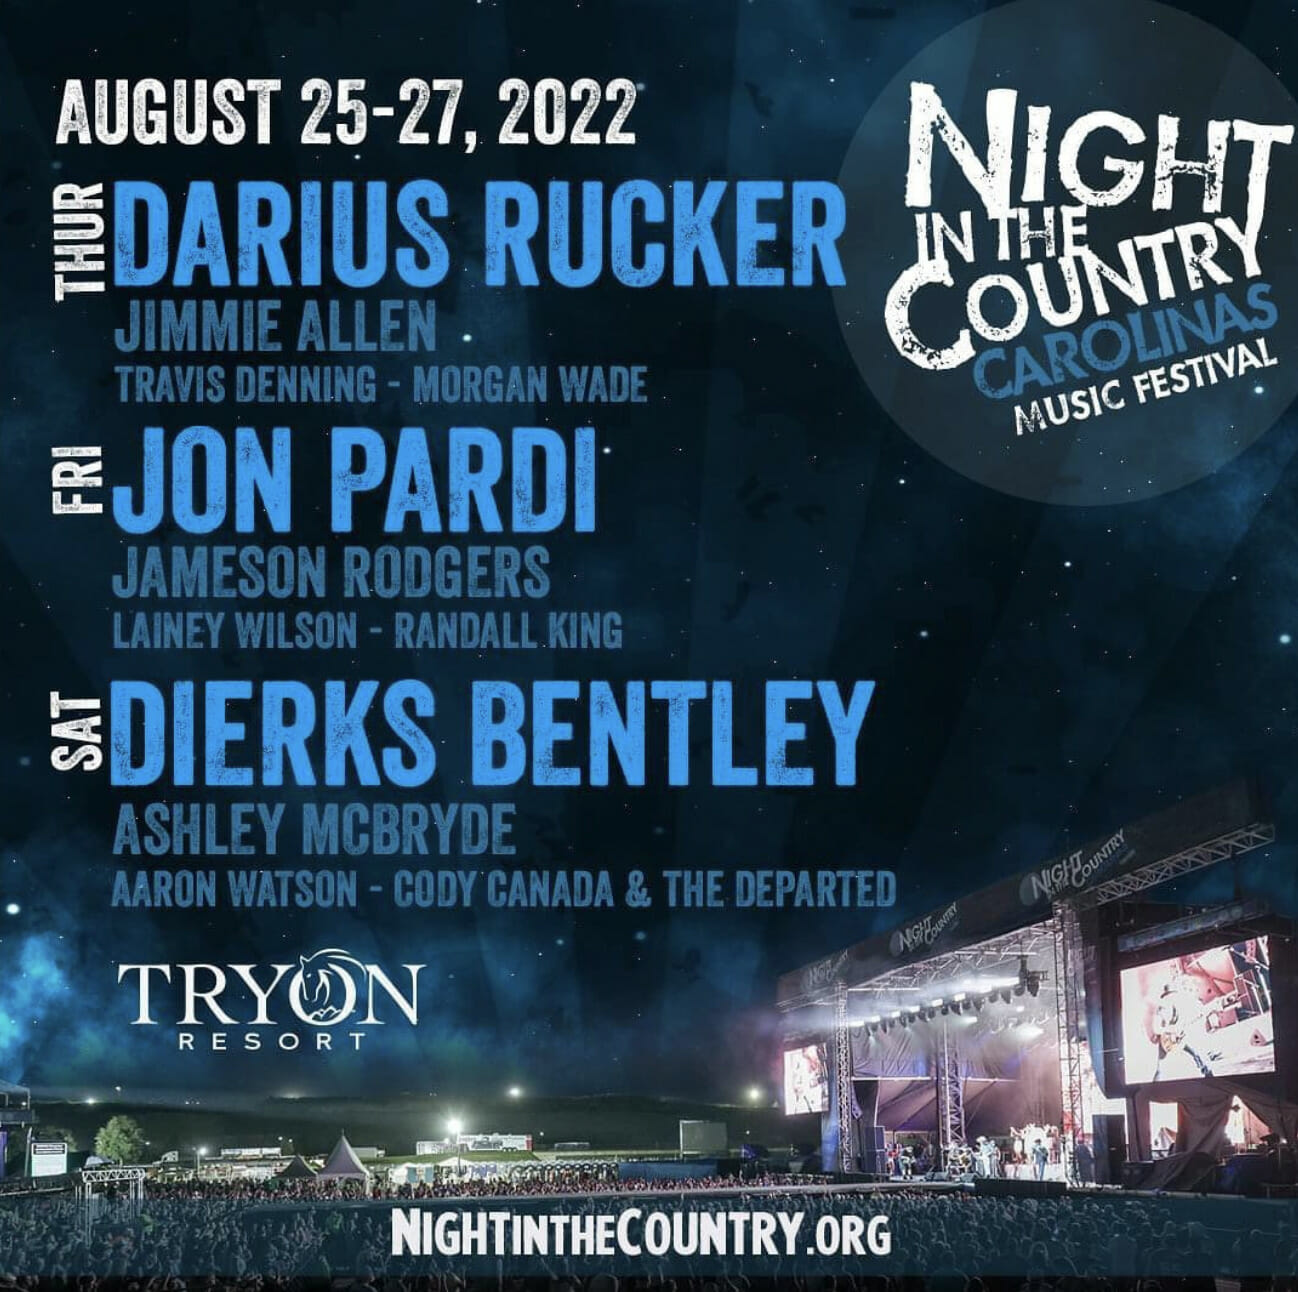 Night in the Country Carolinas Music Festival